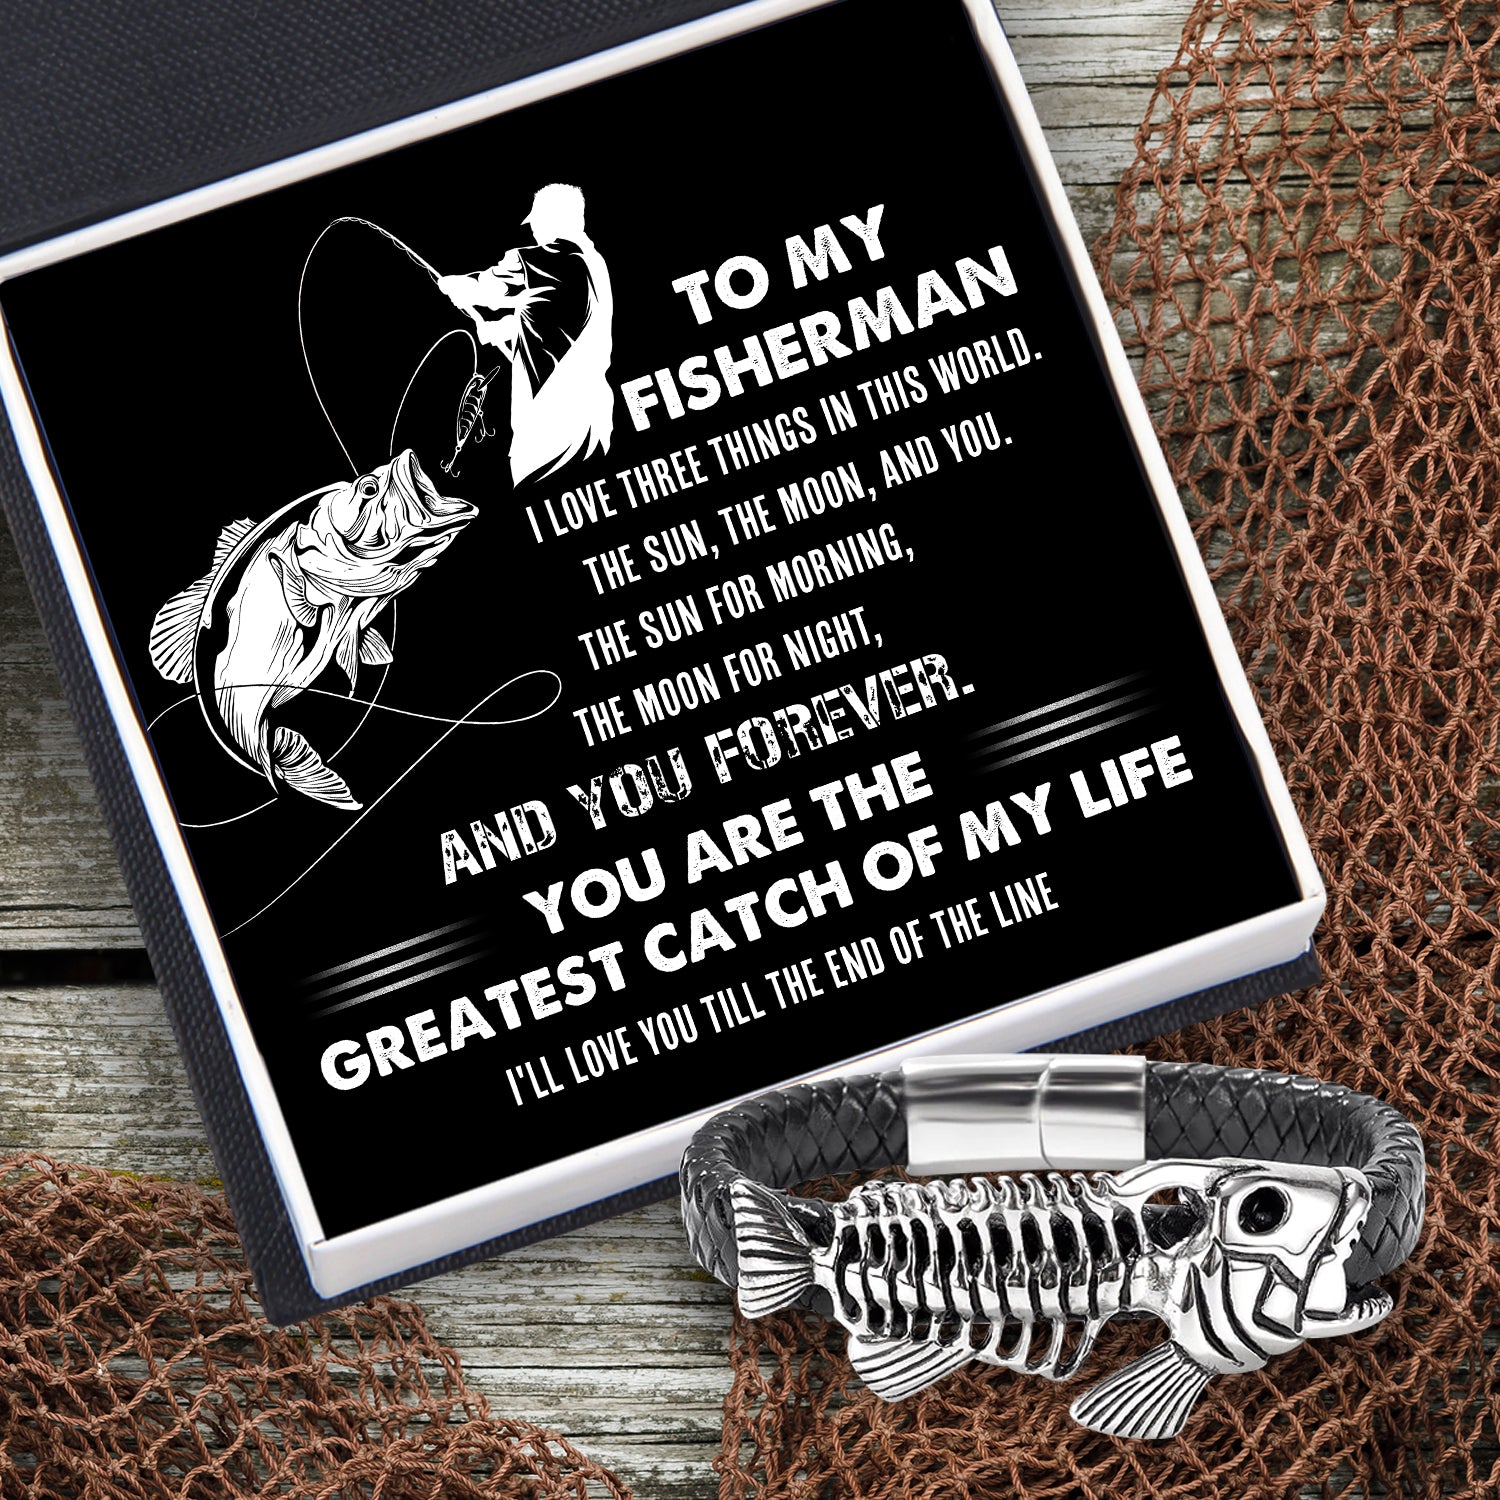 Black Leather Bracelet Fish Bone - Fishing - To My Fisherman - You Are The Greatest Catch Of My Life - Ukgbzr26003